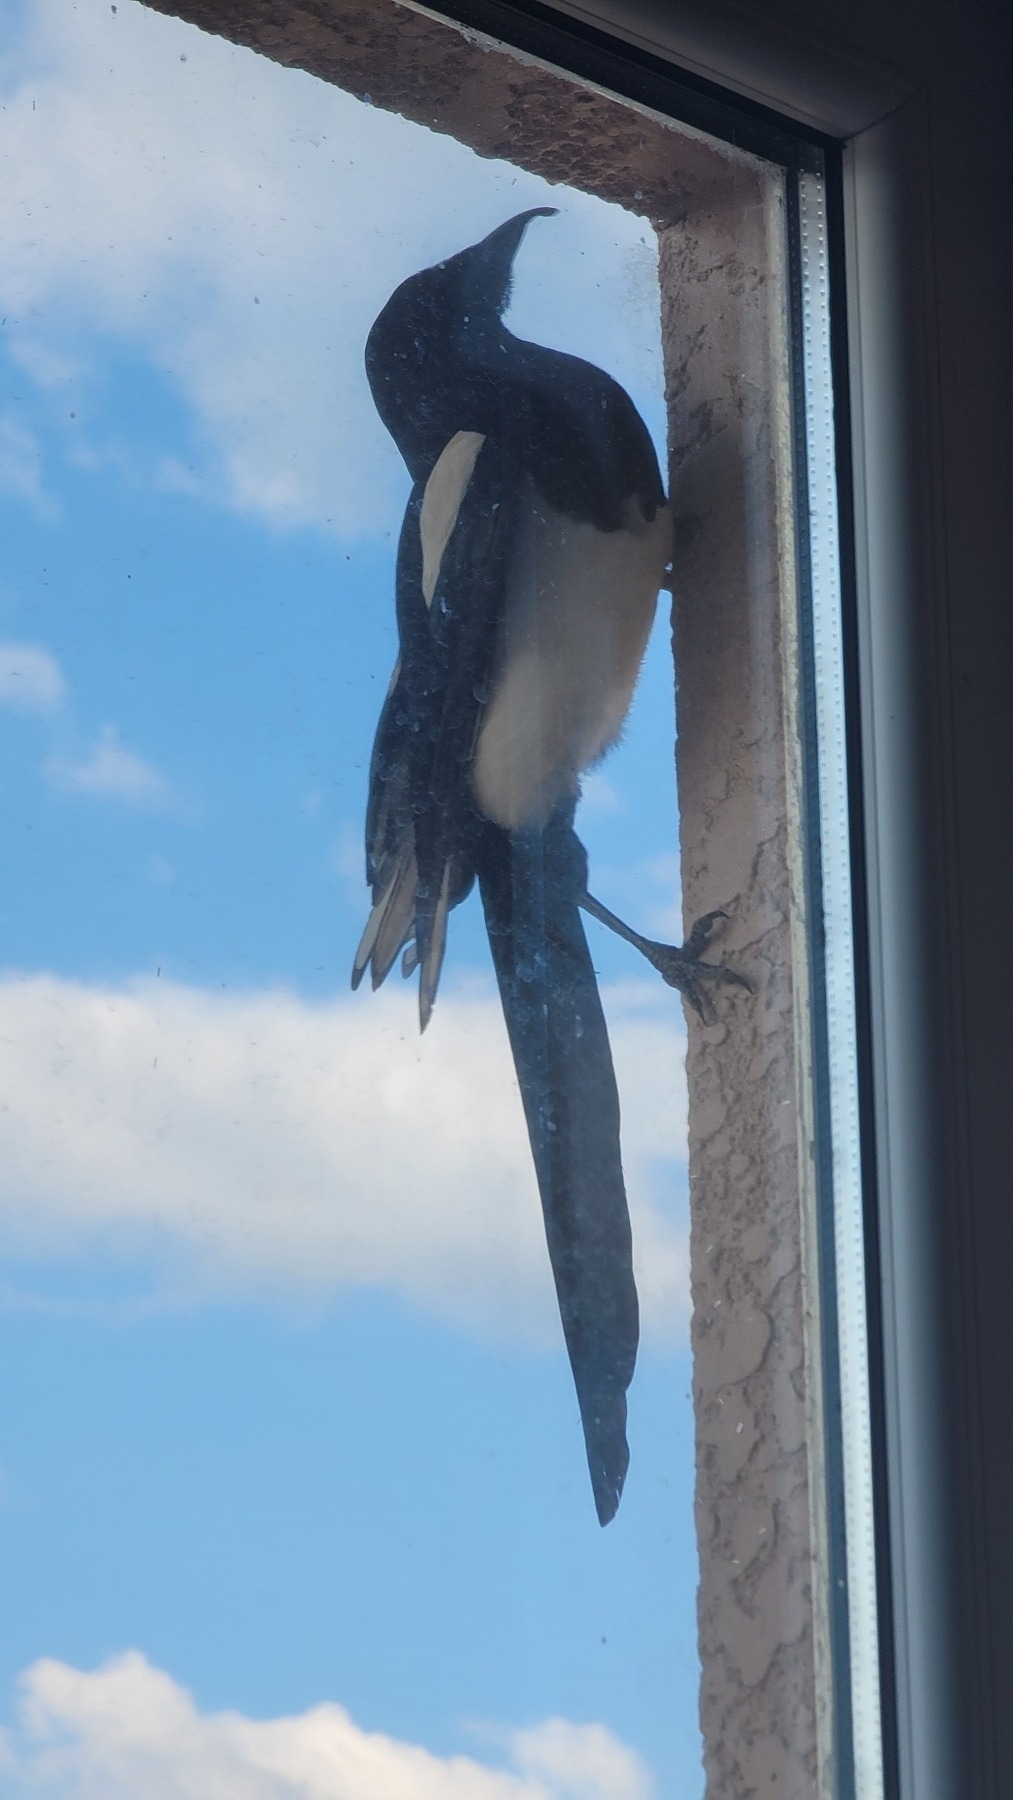 magpie holding on to a wall with its feet outside a window